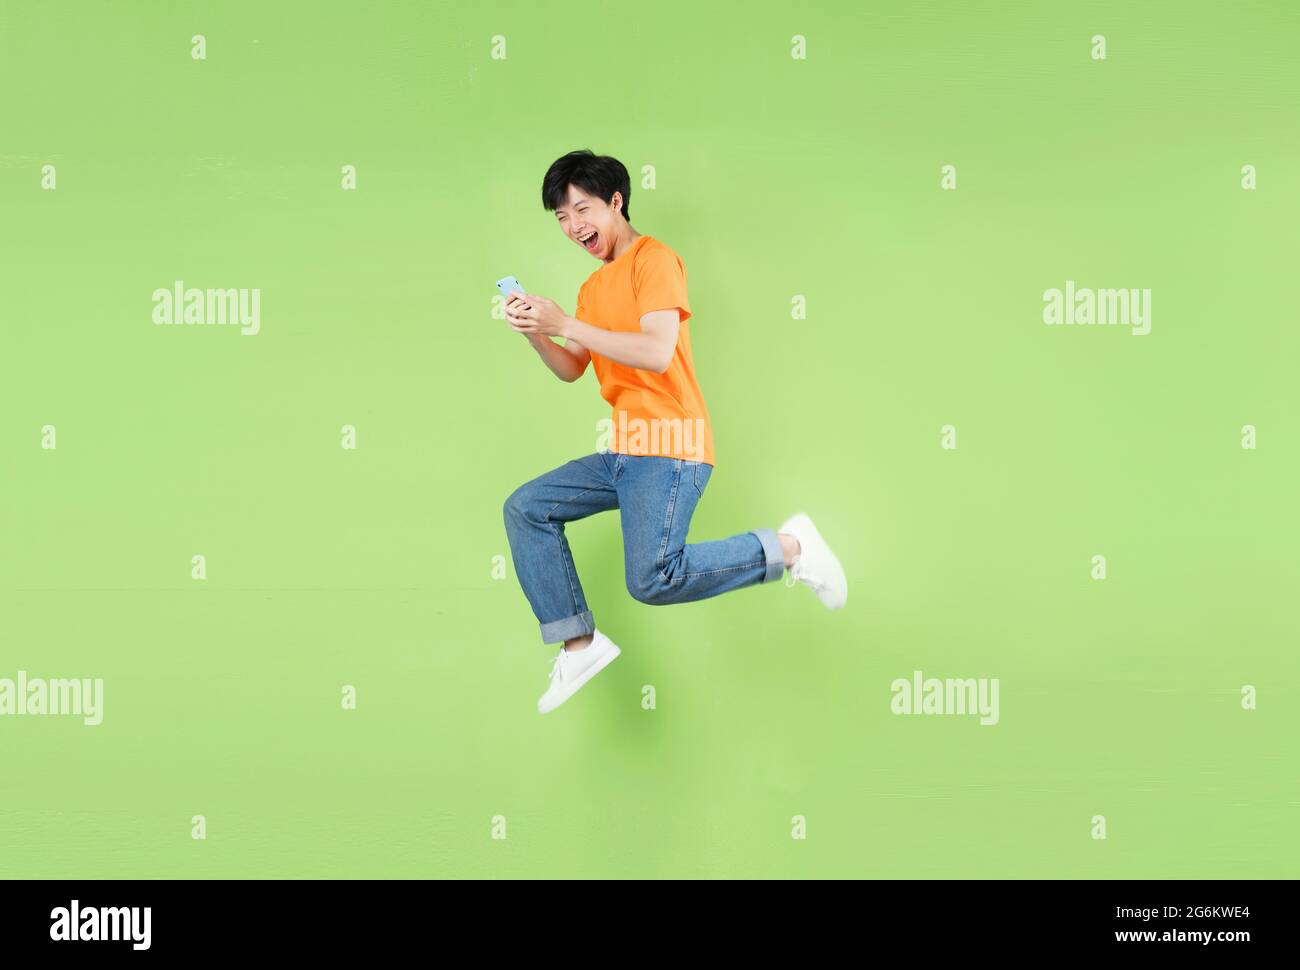 Asian man jumping and holding smartphone , isolated on green Stock Photo